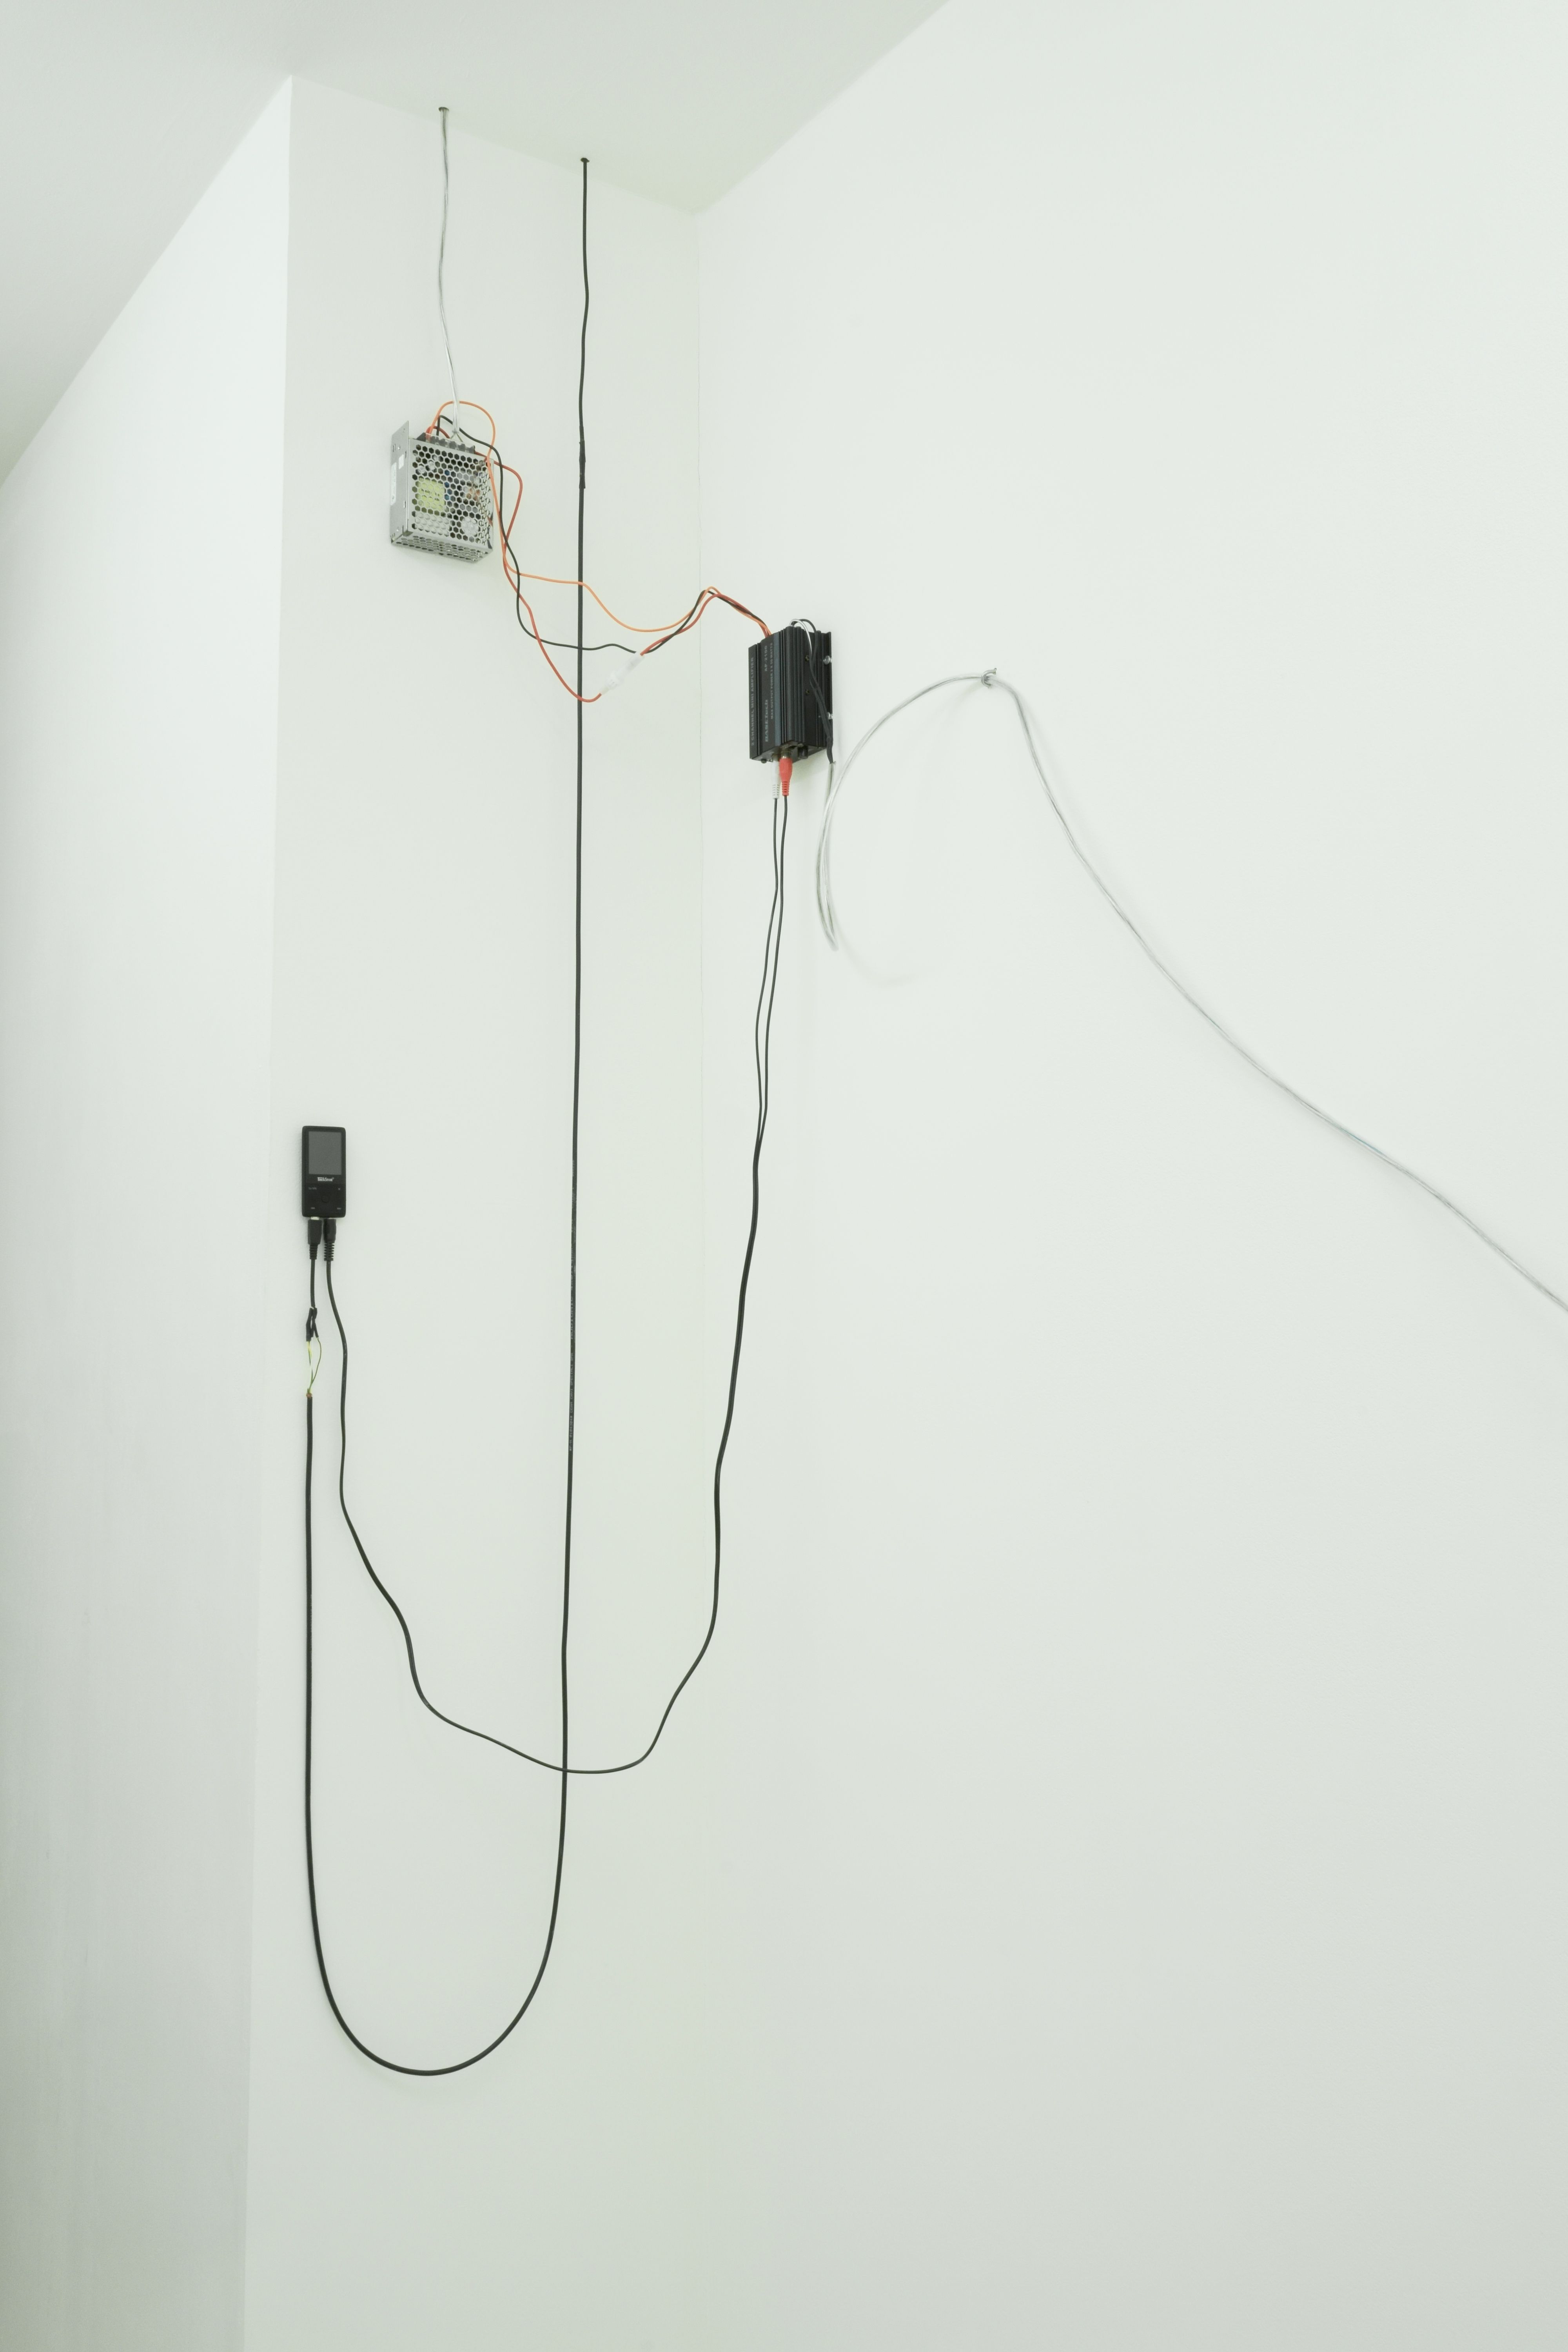 Installation view of electronic components of PPKK 02.00 by Sarah Ancelle Schoenfeld and Louis-Philippe Scoufaras at Schwules Museum Berlin